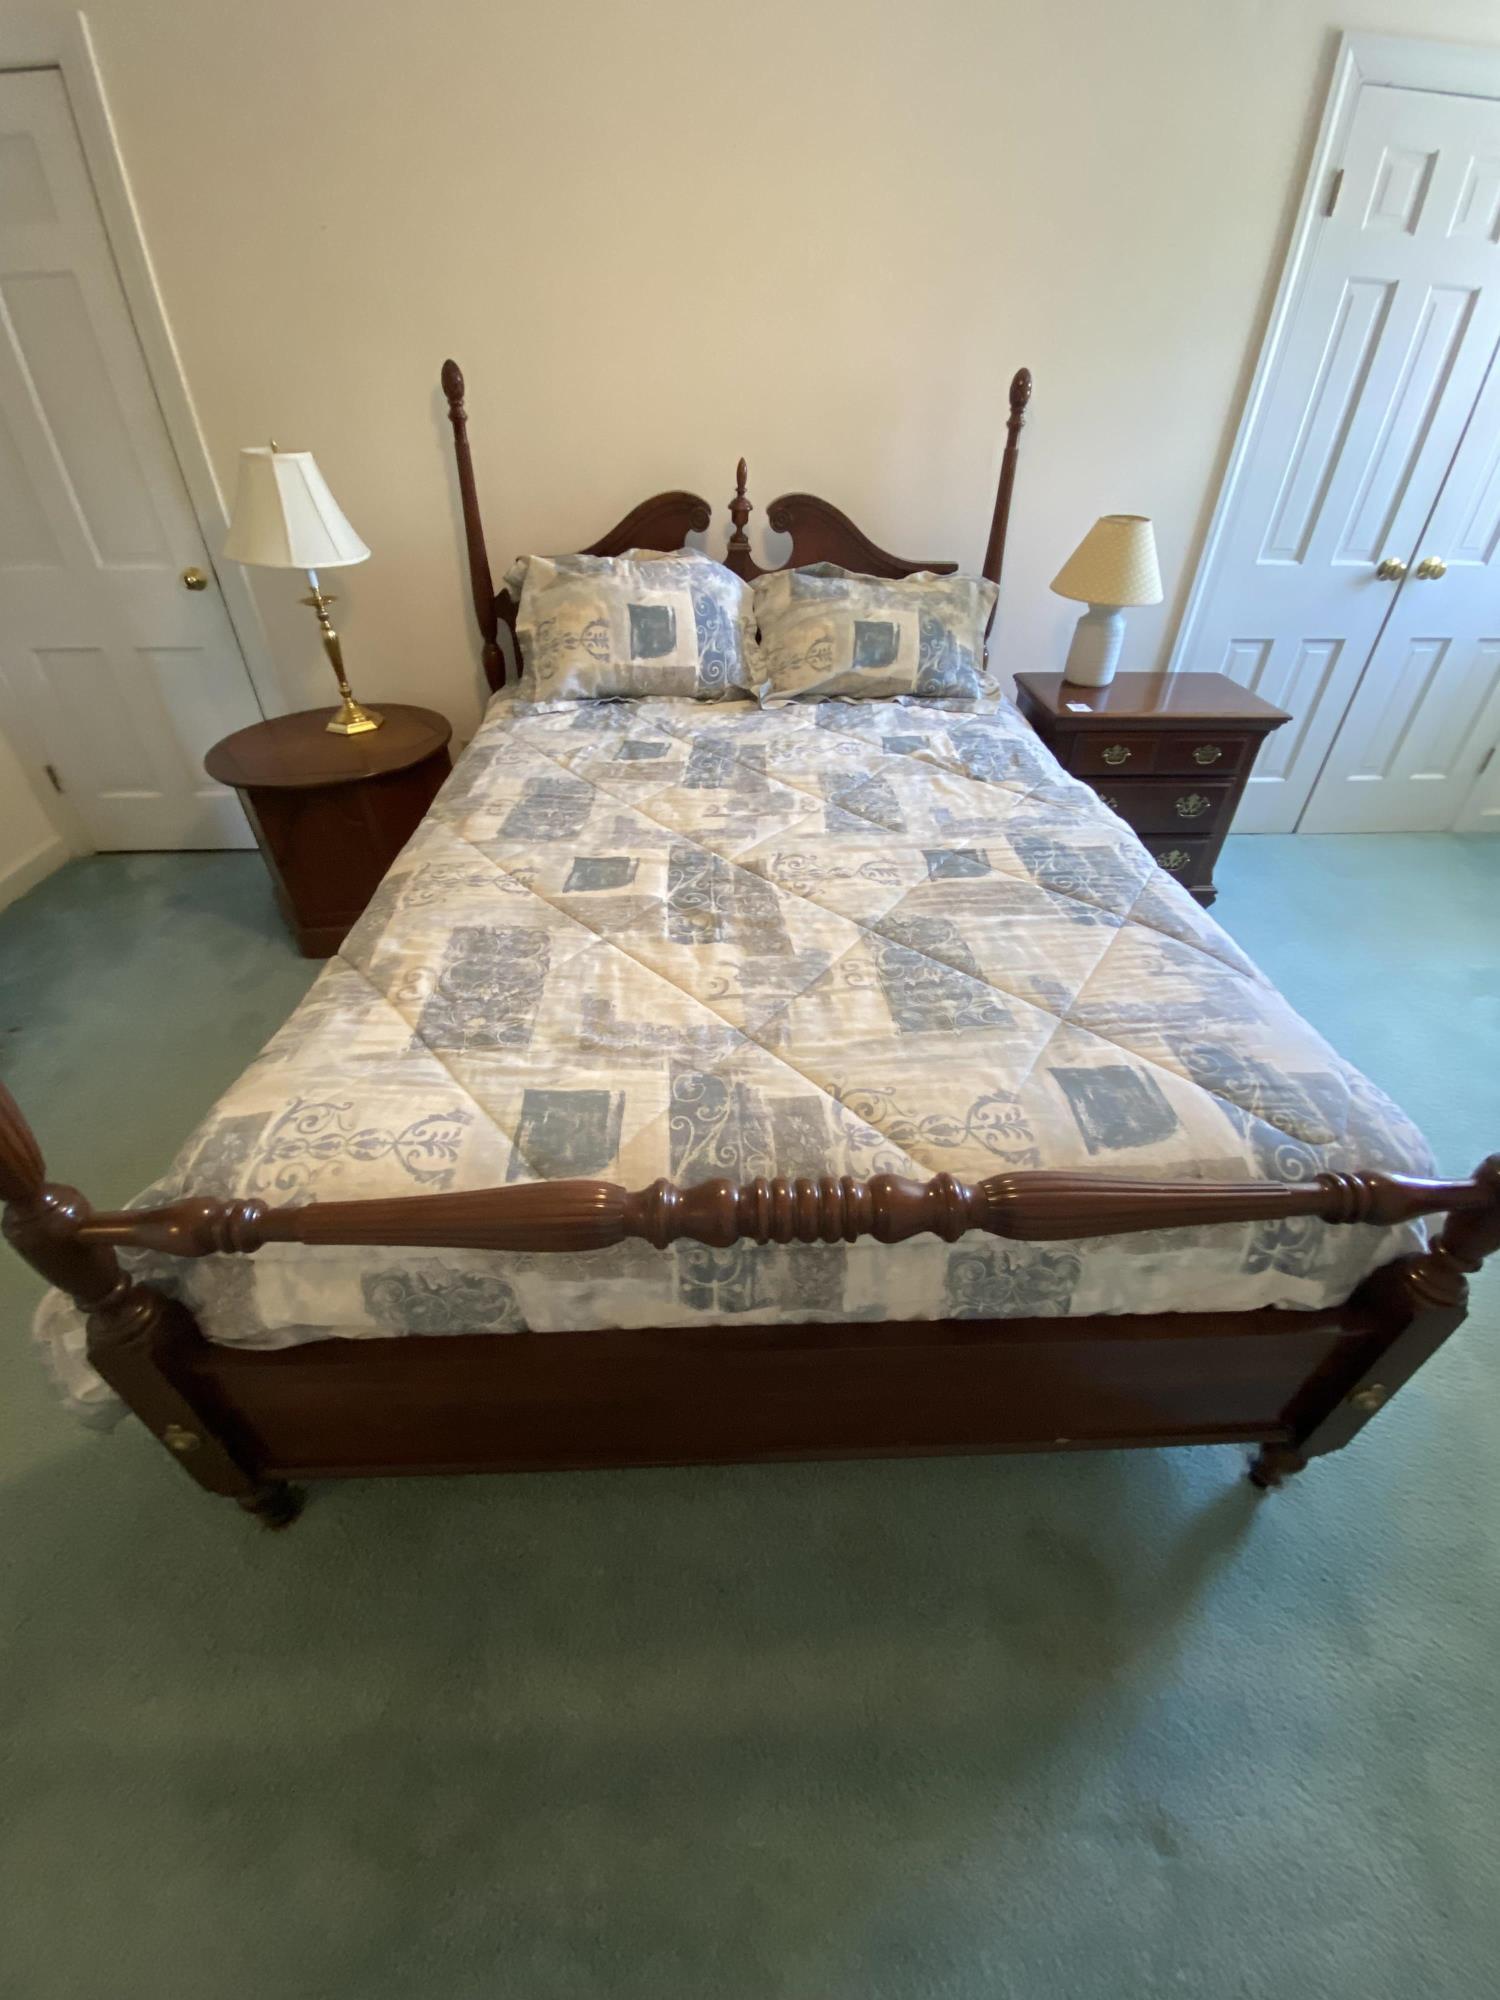 FOUR POSTER BED - QUEEN SIZE